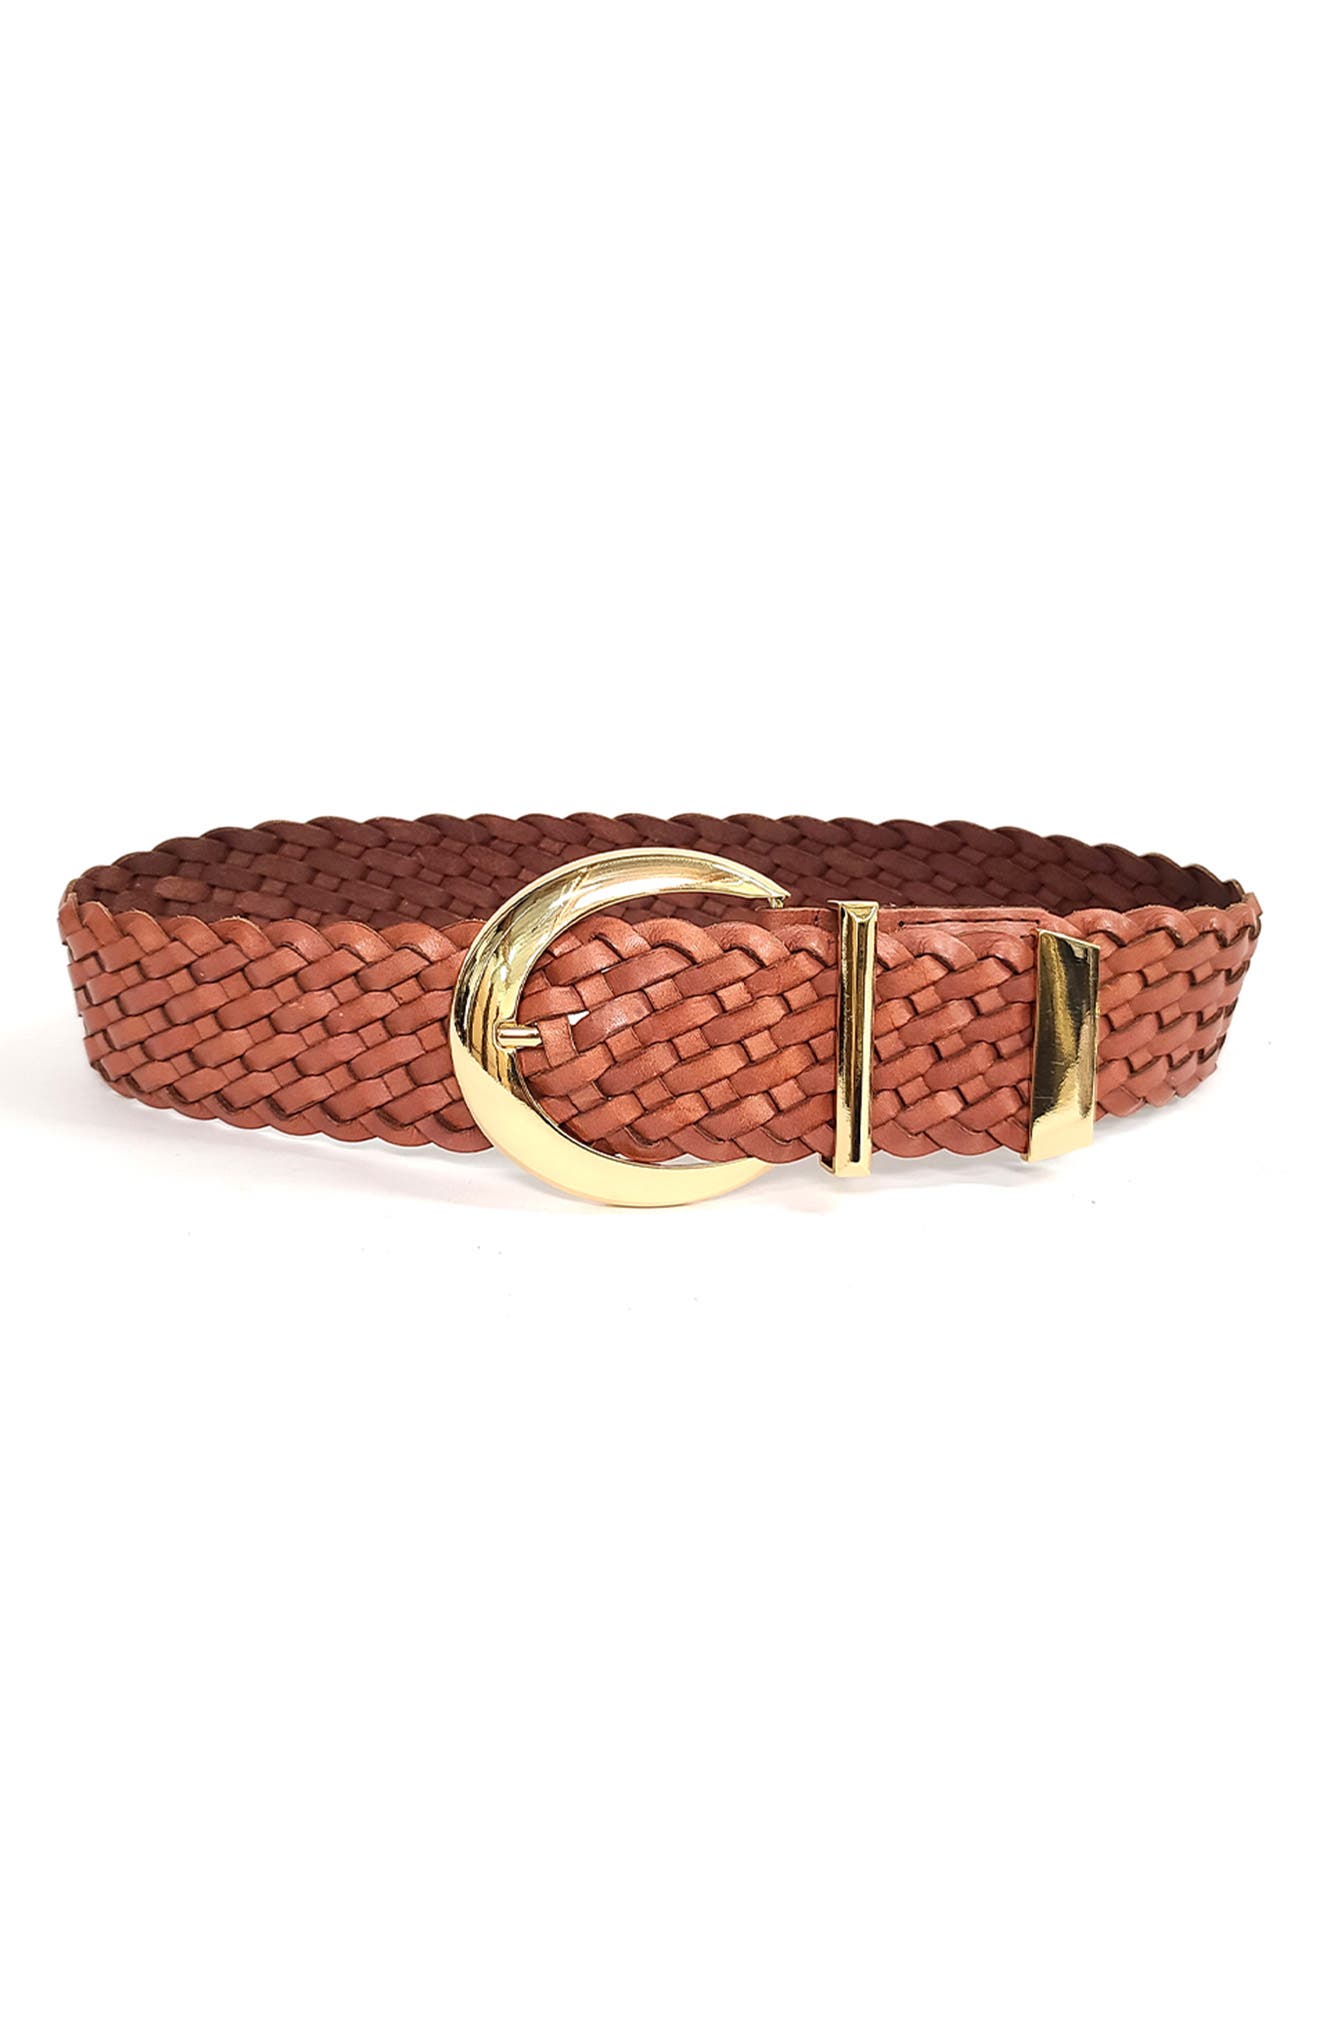 Extra Large Brown Witty Weaved Leather Belt 42"